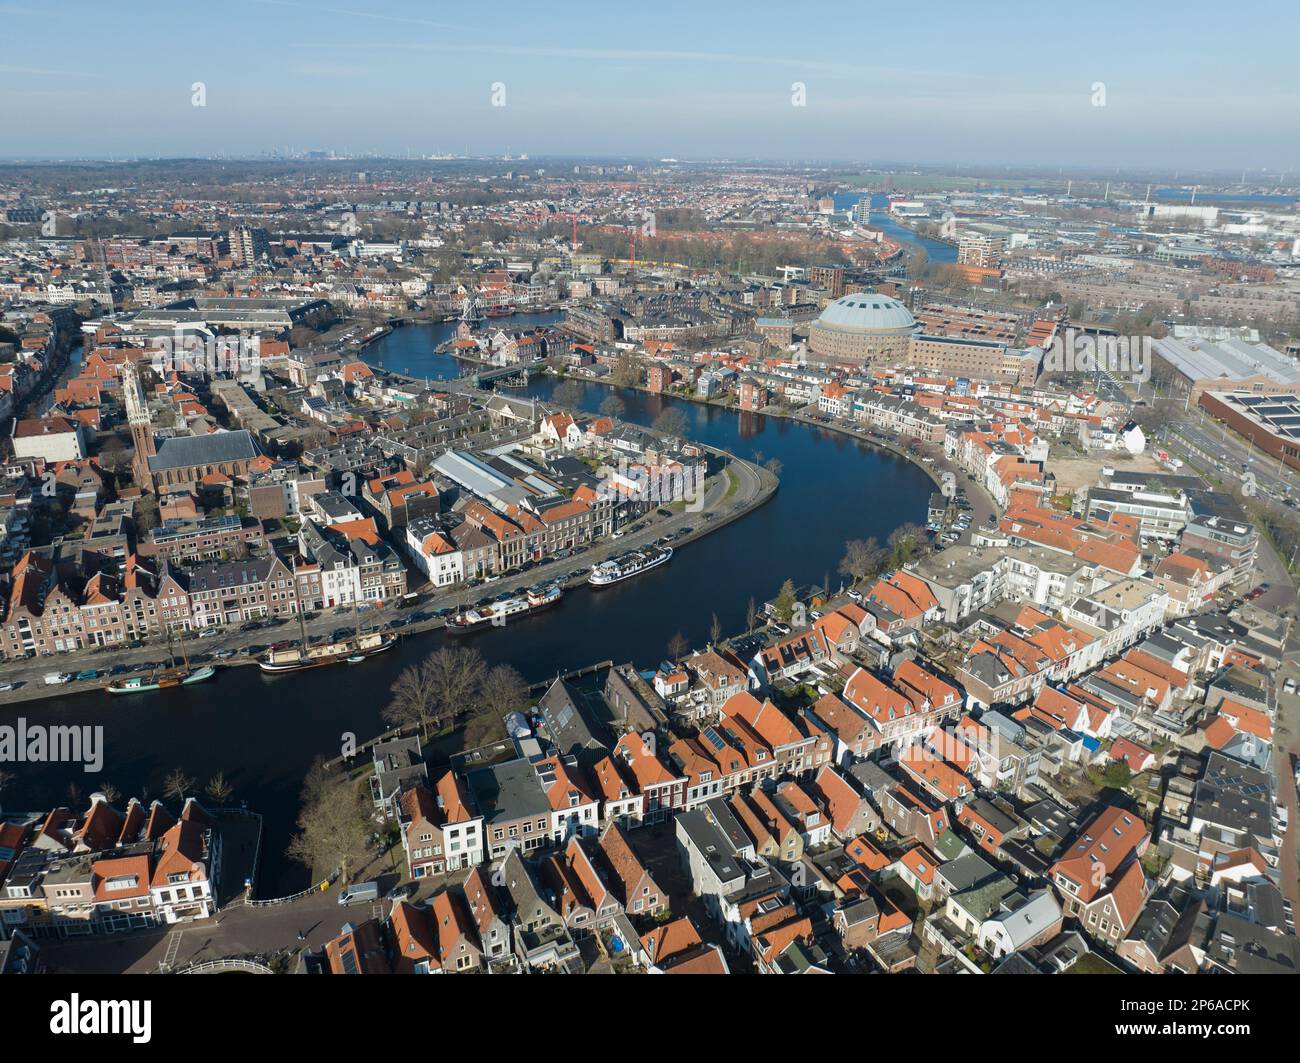 Soar over the historical landmarks and picturesque city center of Haarlem with this breathtaking drone video, featuring the former Koepelgevangenis Stock Photo